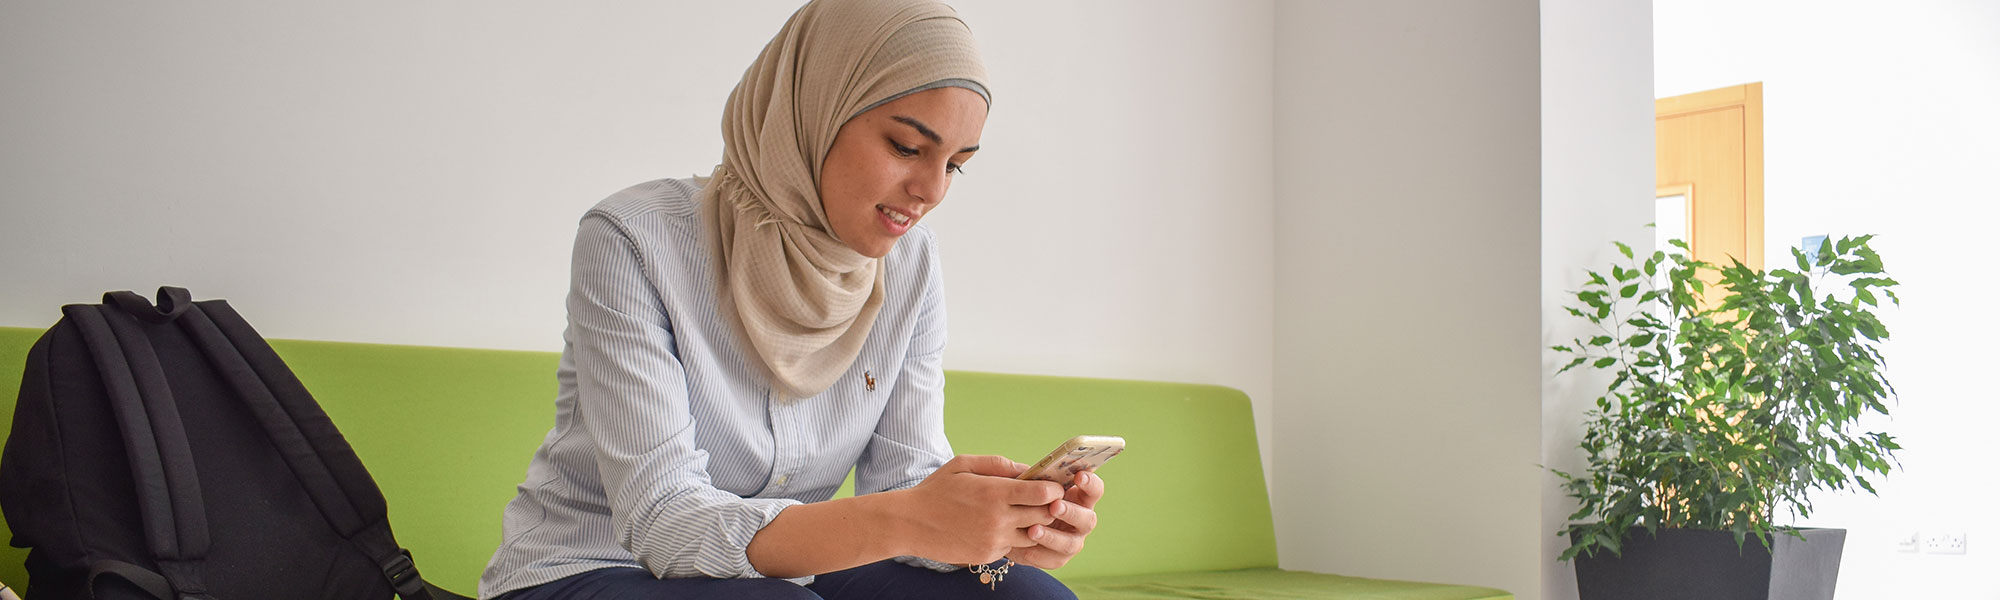 International student seated on green couch and looking at mobile phone